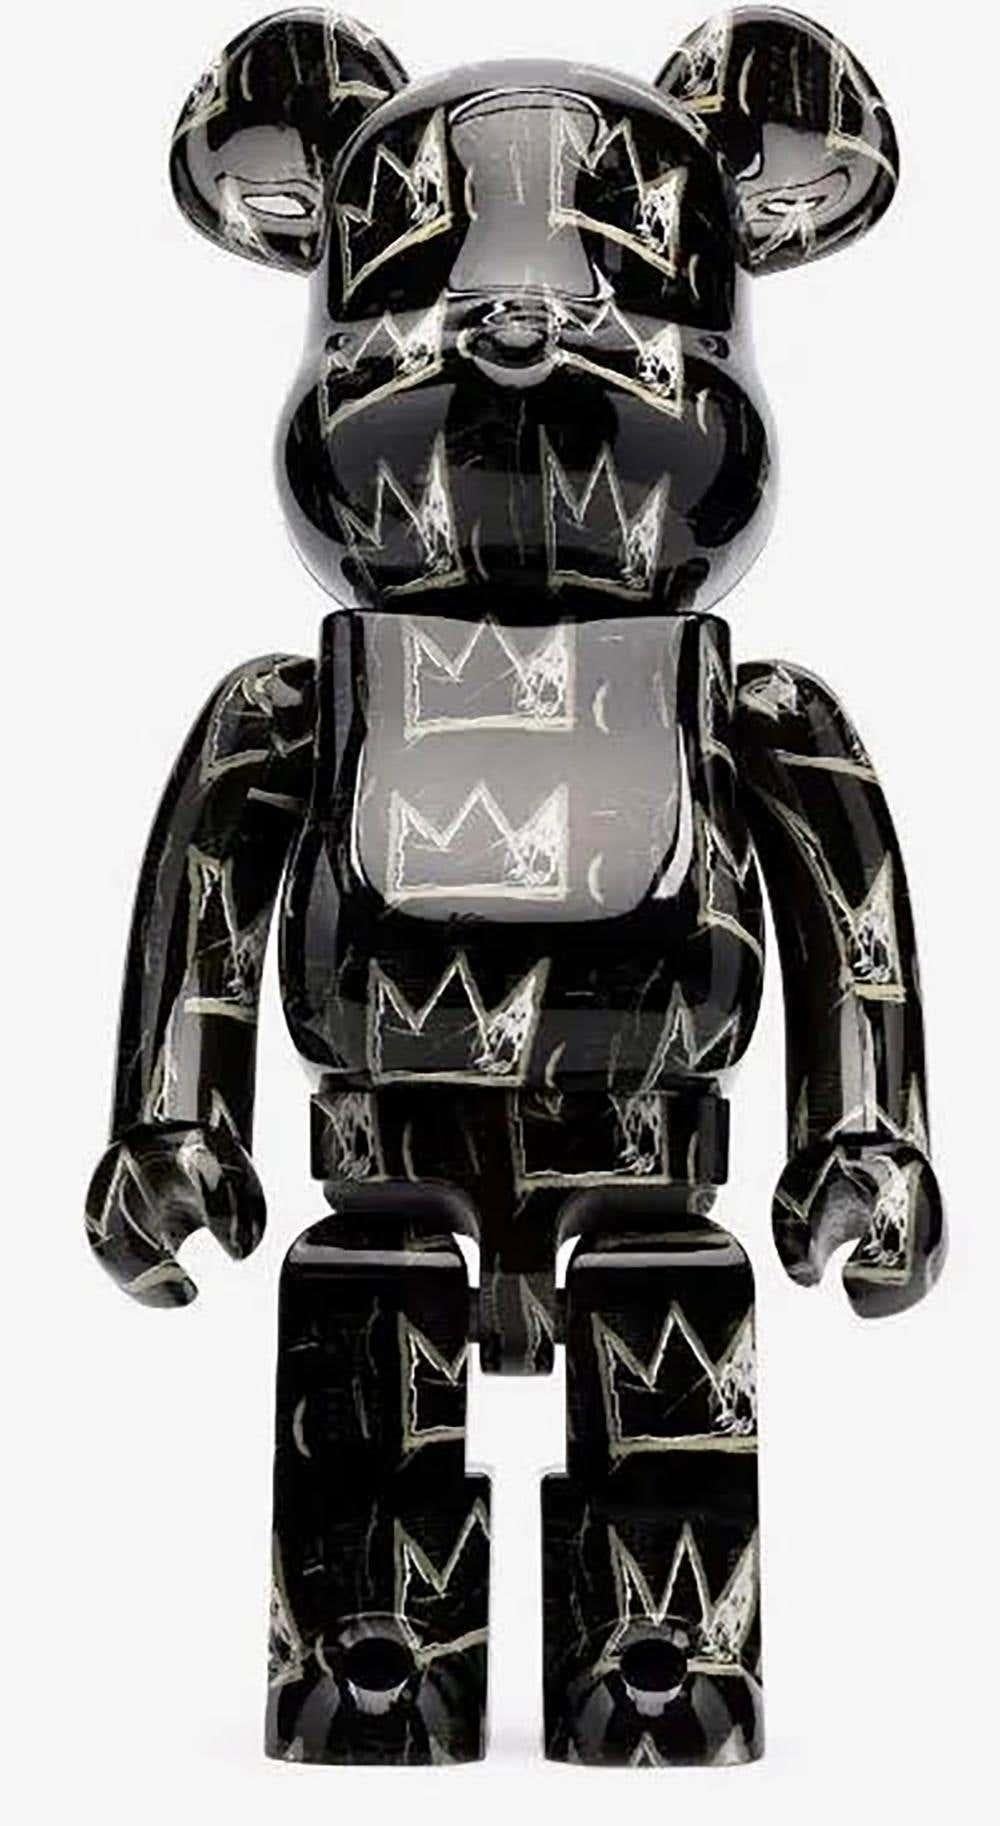 Bearbrick x Estate of Jean Michel Basquiat, Andy Warhol Foundation, and Keith Haring Foundation 400%: set of 6 individual works:
A set of 6 unique, timeless pop art collectibles trademarked & licensed by the estates of Jean Michel Basquiat, Andy